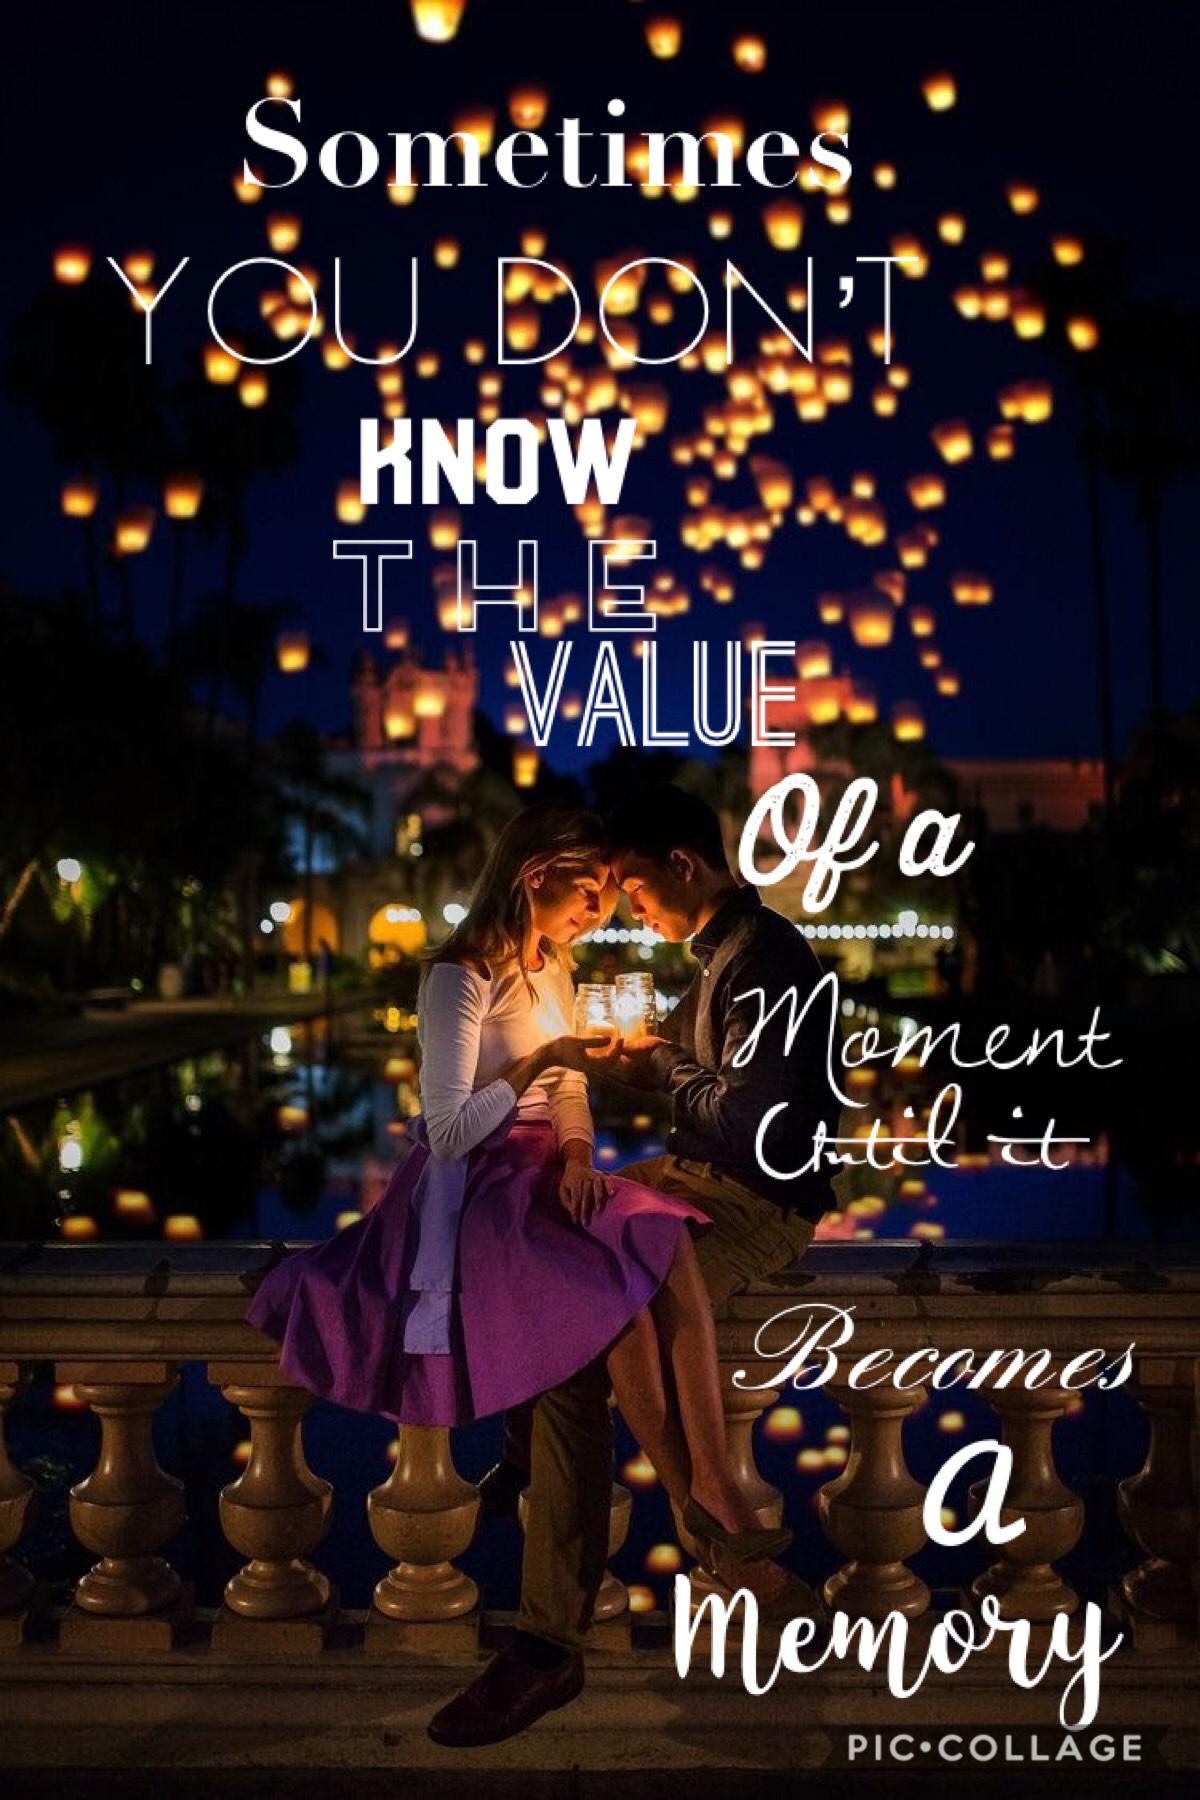 ❤️ Tap Here ❤️
I preferred my first collage 🤷‍♀️😂 But I love the background picture 😍 QOTD: What’s your favorite memory? 🤔✨ AOTD: Staying up late at night with my friends 🌙 👭